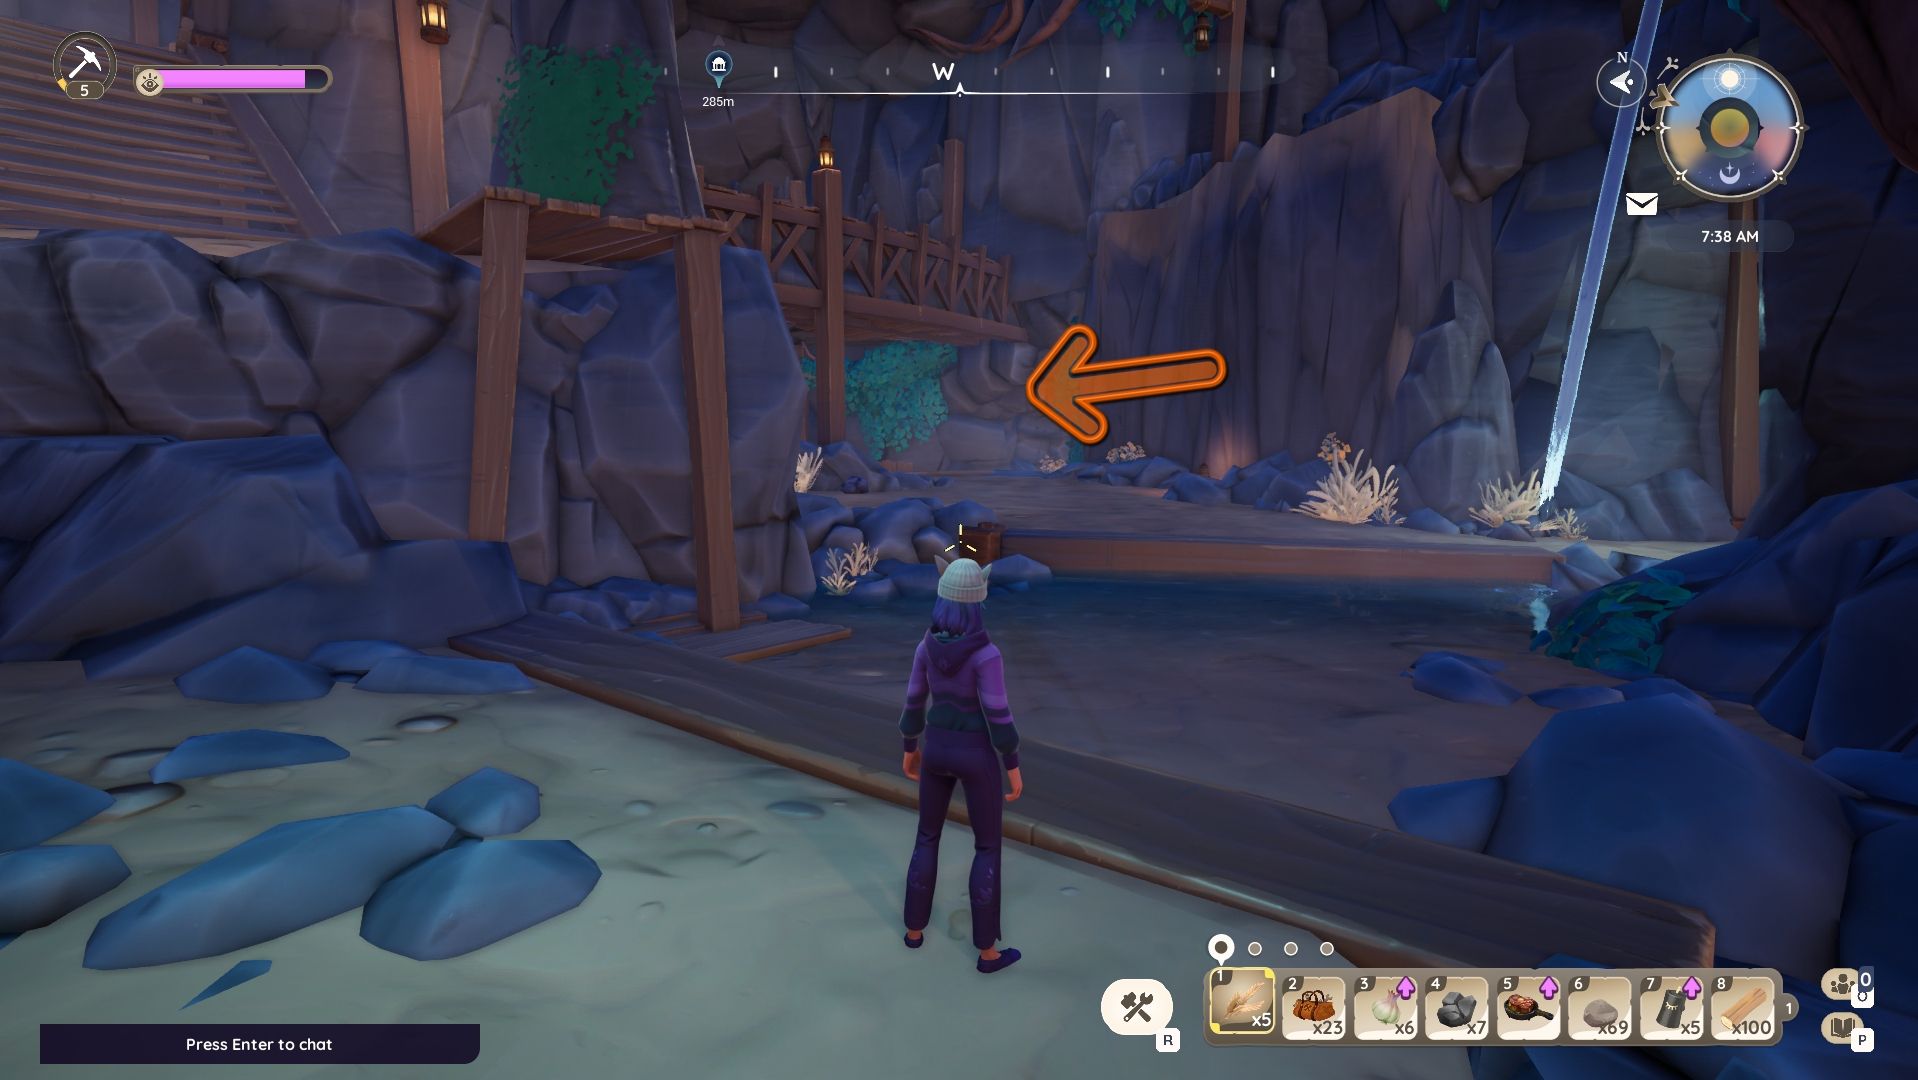 Palia Pavel Mines with an avatar standing in the mines, and an orange arrow pointing the way to a fishing spot. The spot is beyond the wood-reinforced overhang.